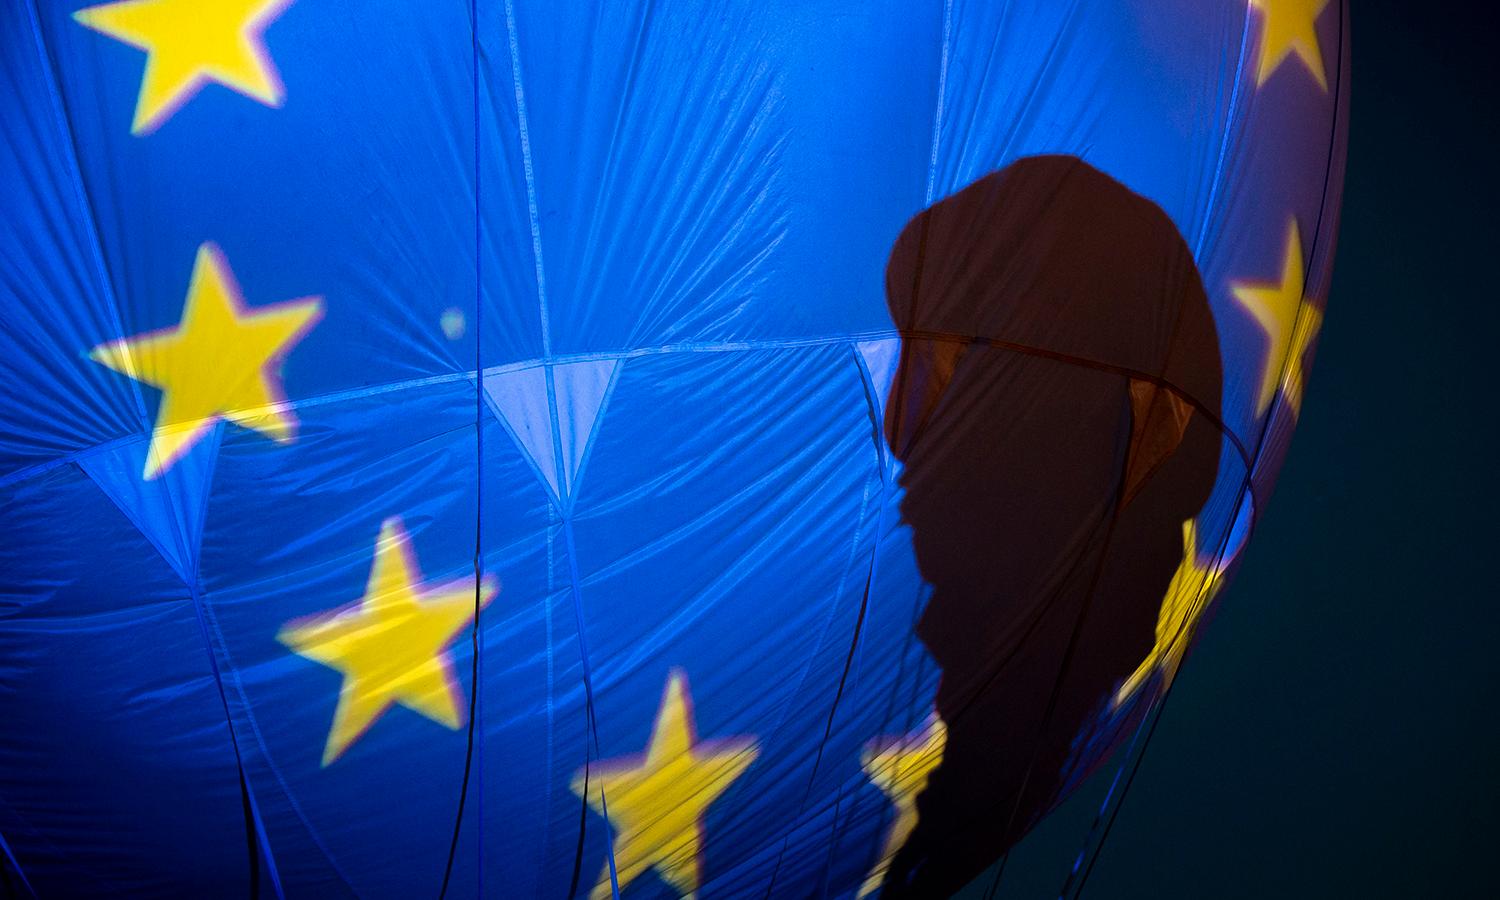 The flag of the European Union is projected on helium balloon